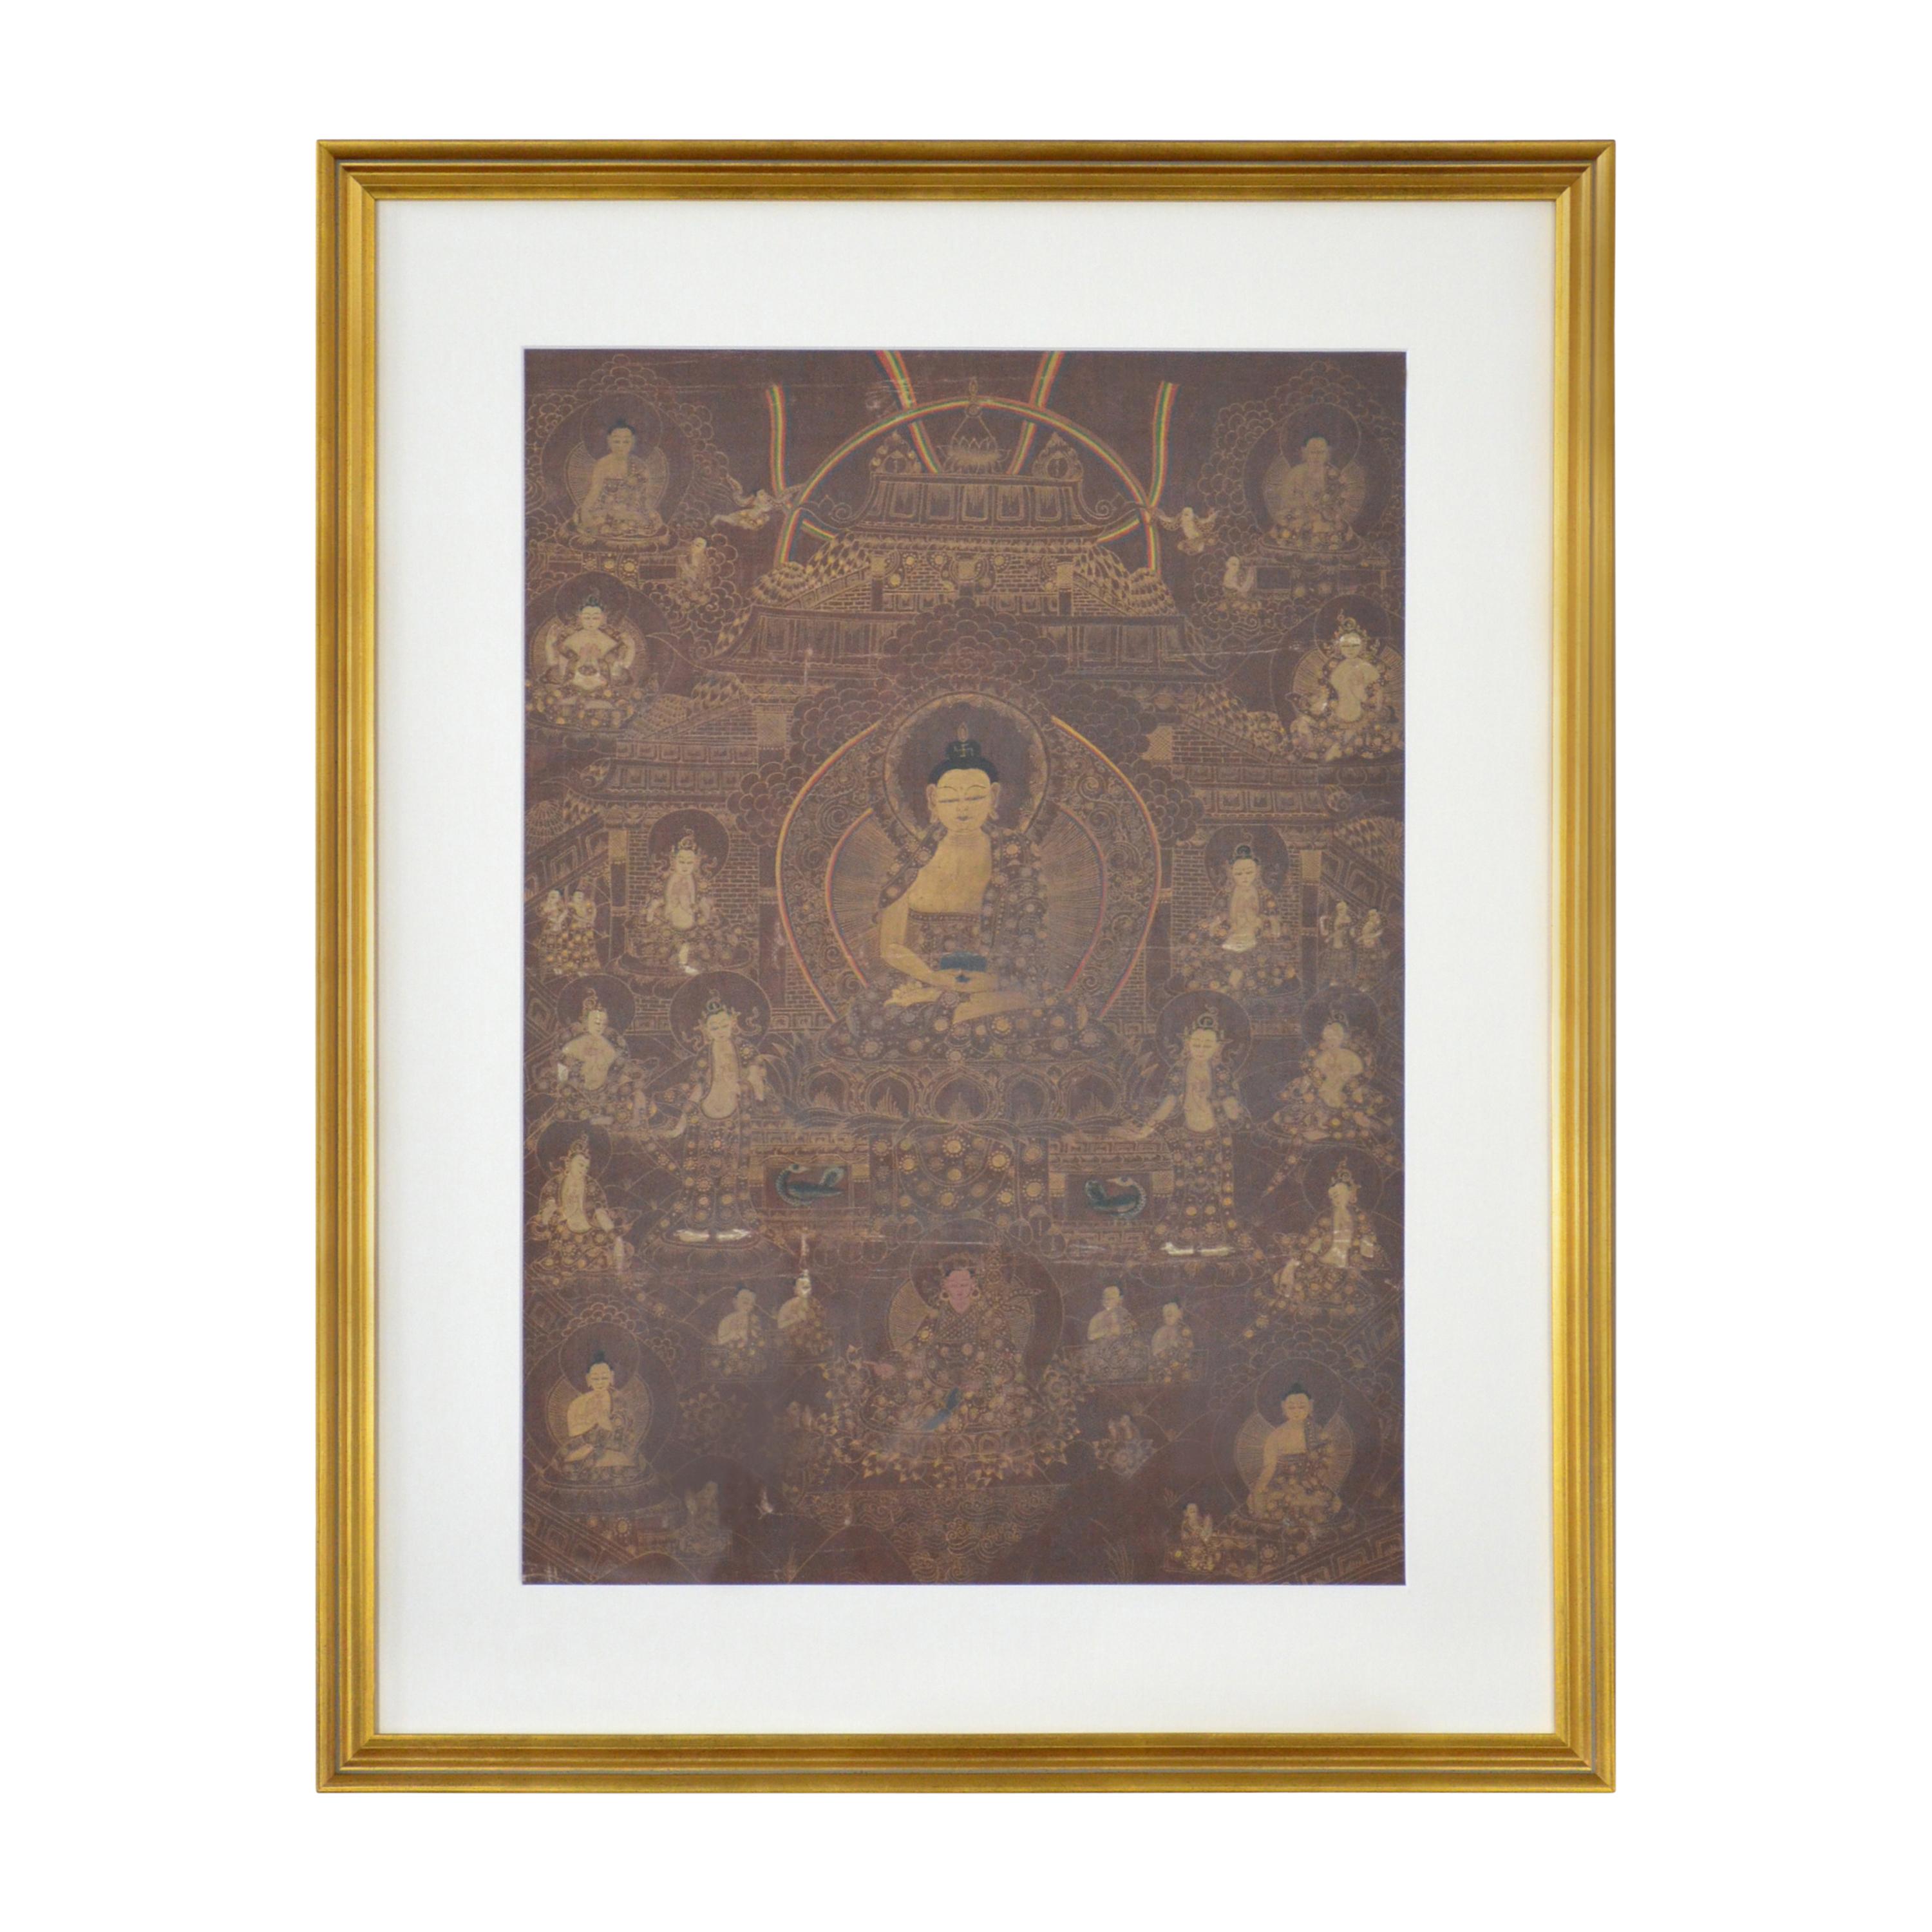 A vintage Tibetan hand-painted Thangka painting on canvas depicting Buddhist deities, in gilded frame. Created in India during the mid 20th century, this painting on canvas, called a Thangka, showcases a monochrome palette made of brown and beige